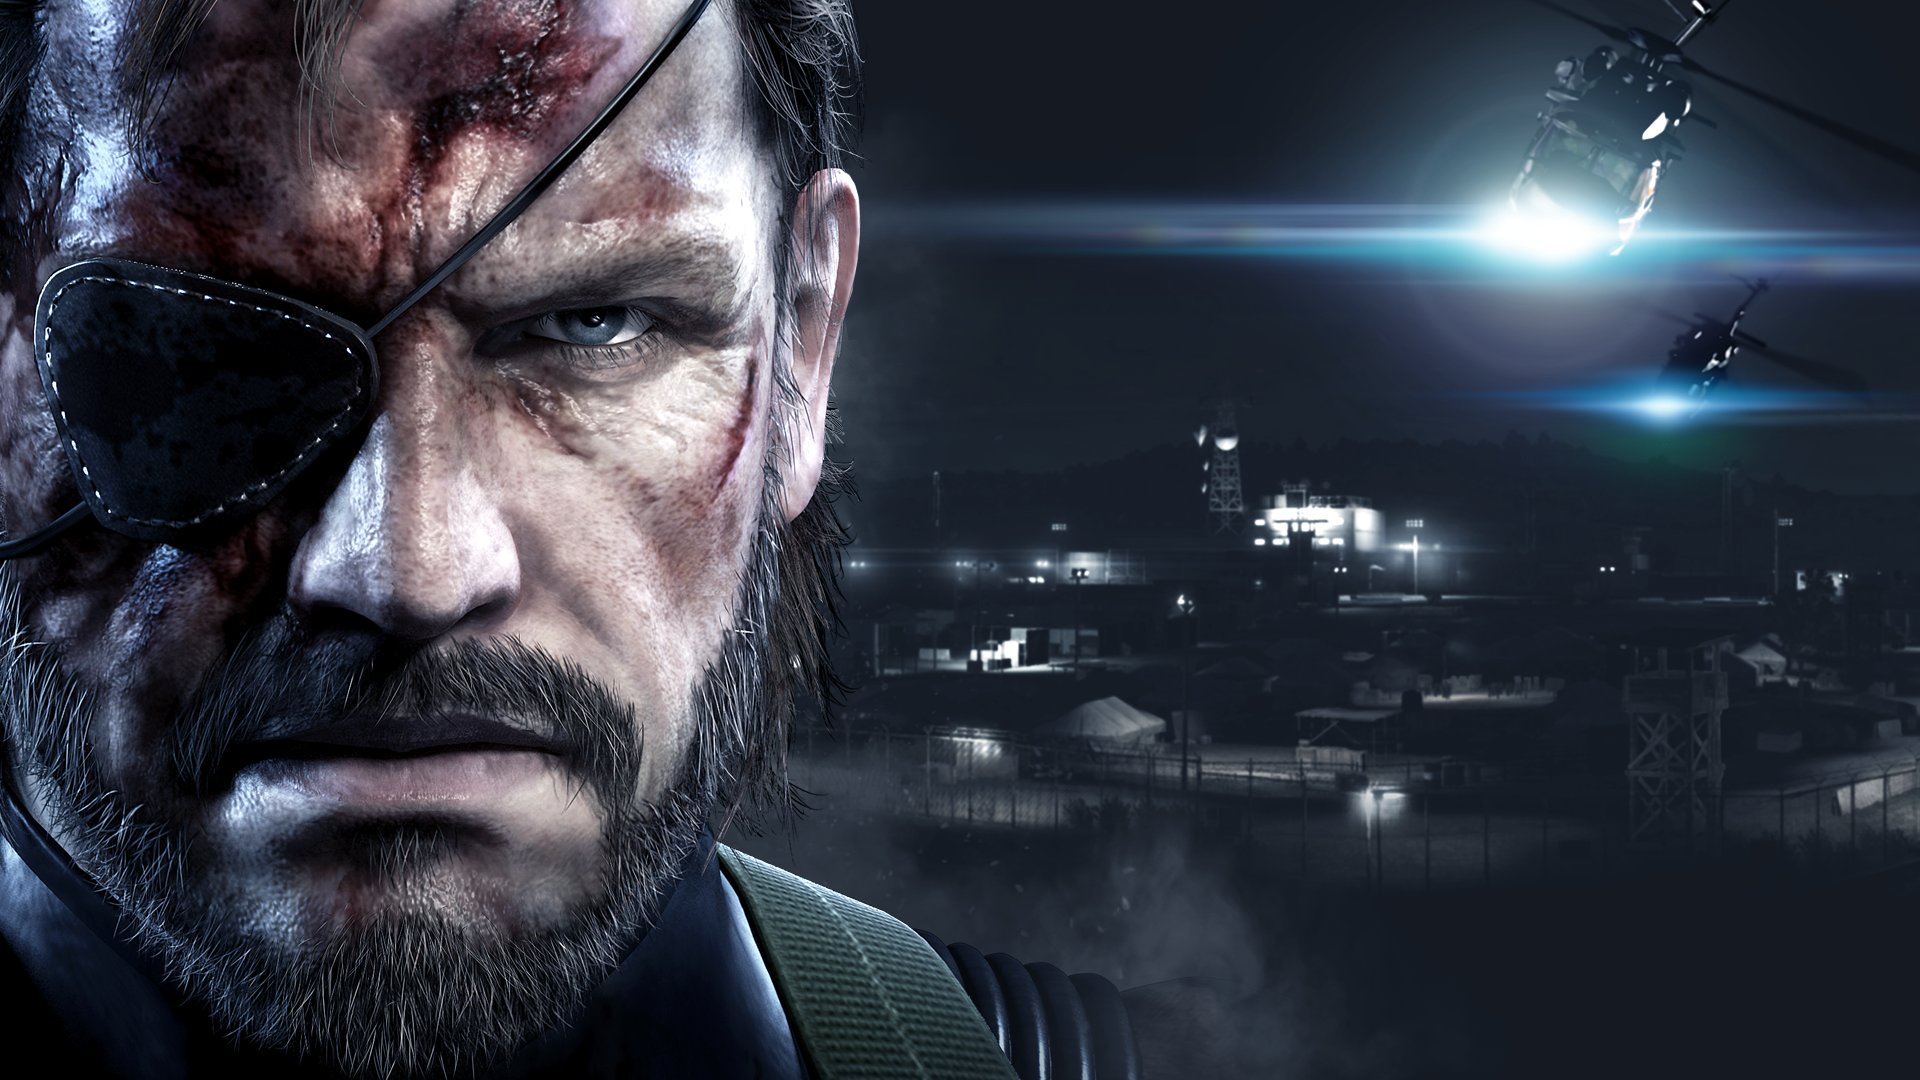 Metal Gear Solid V Ground Zeroes Wallpaper Background